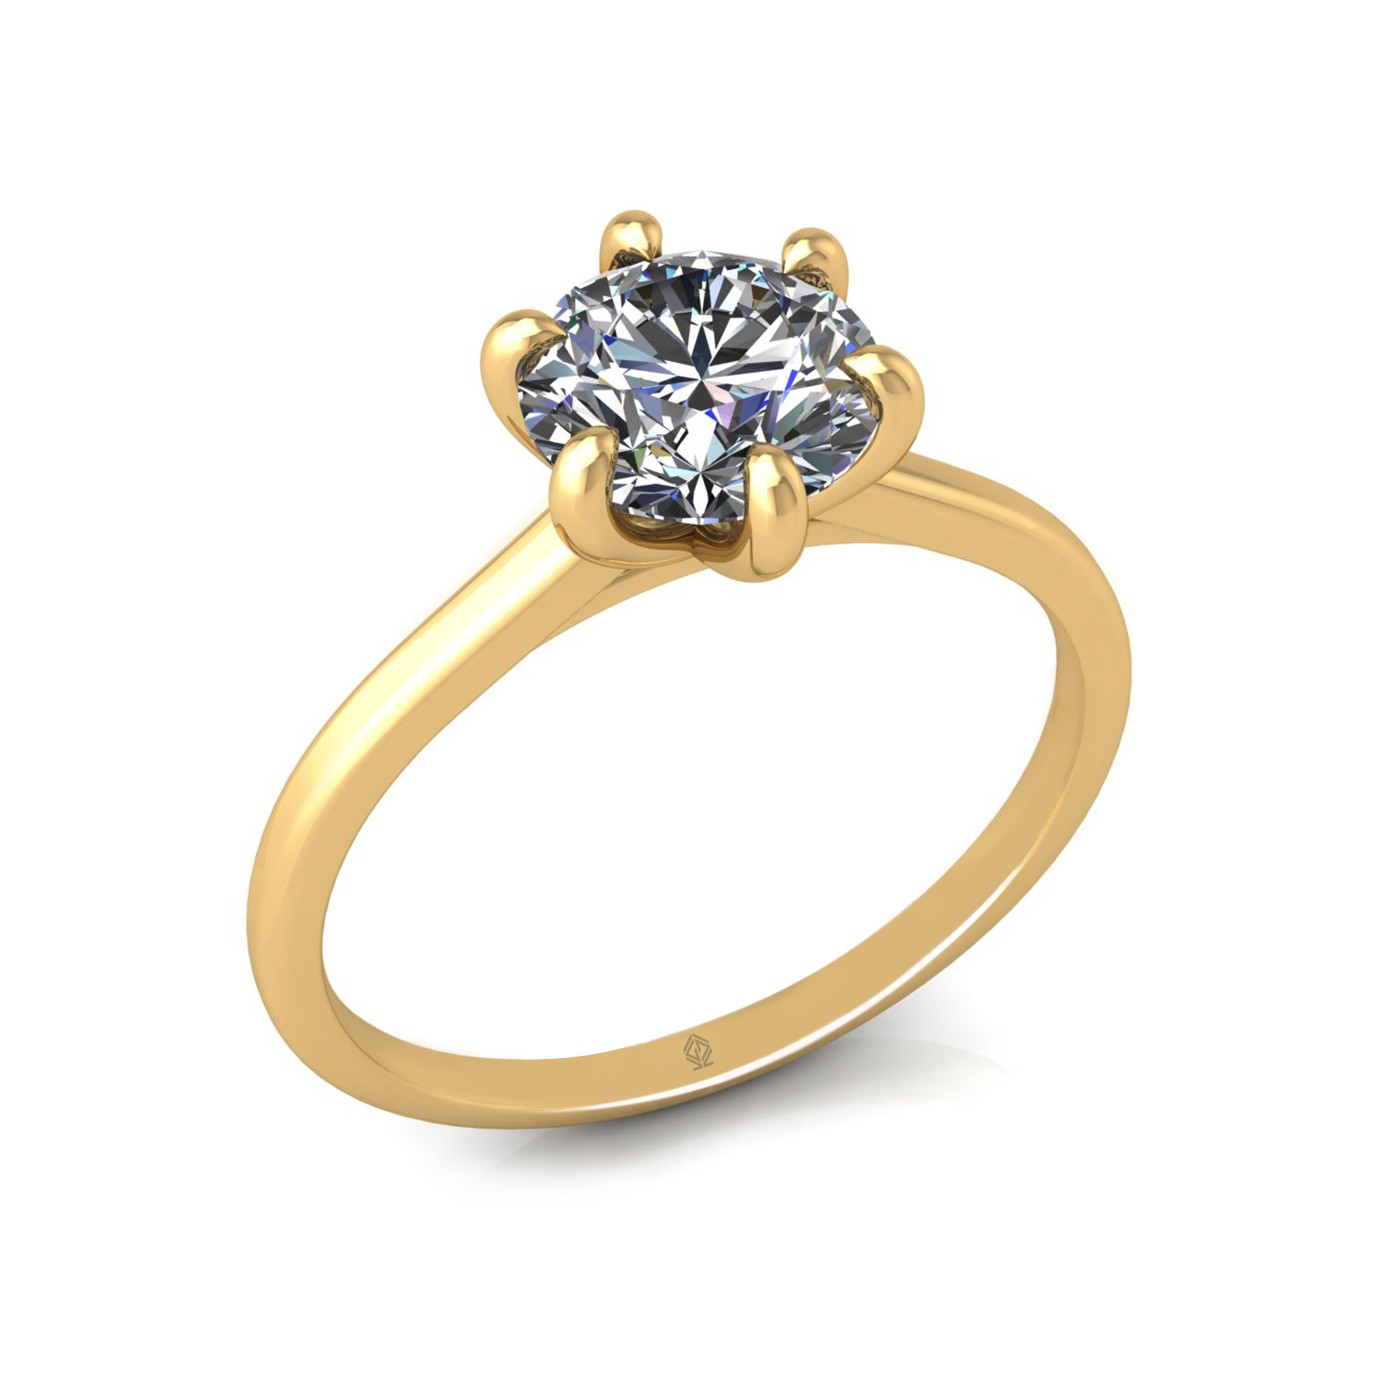 18k yellow gold 1,20 ct 6 prongs solitaire round cut diamond engagement ring with whisper thin band